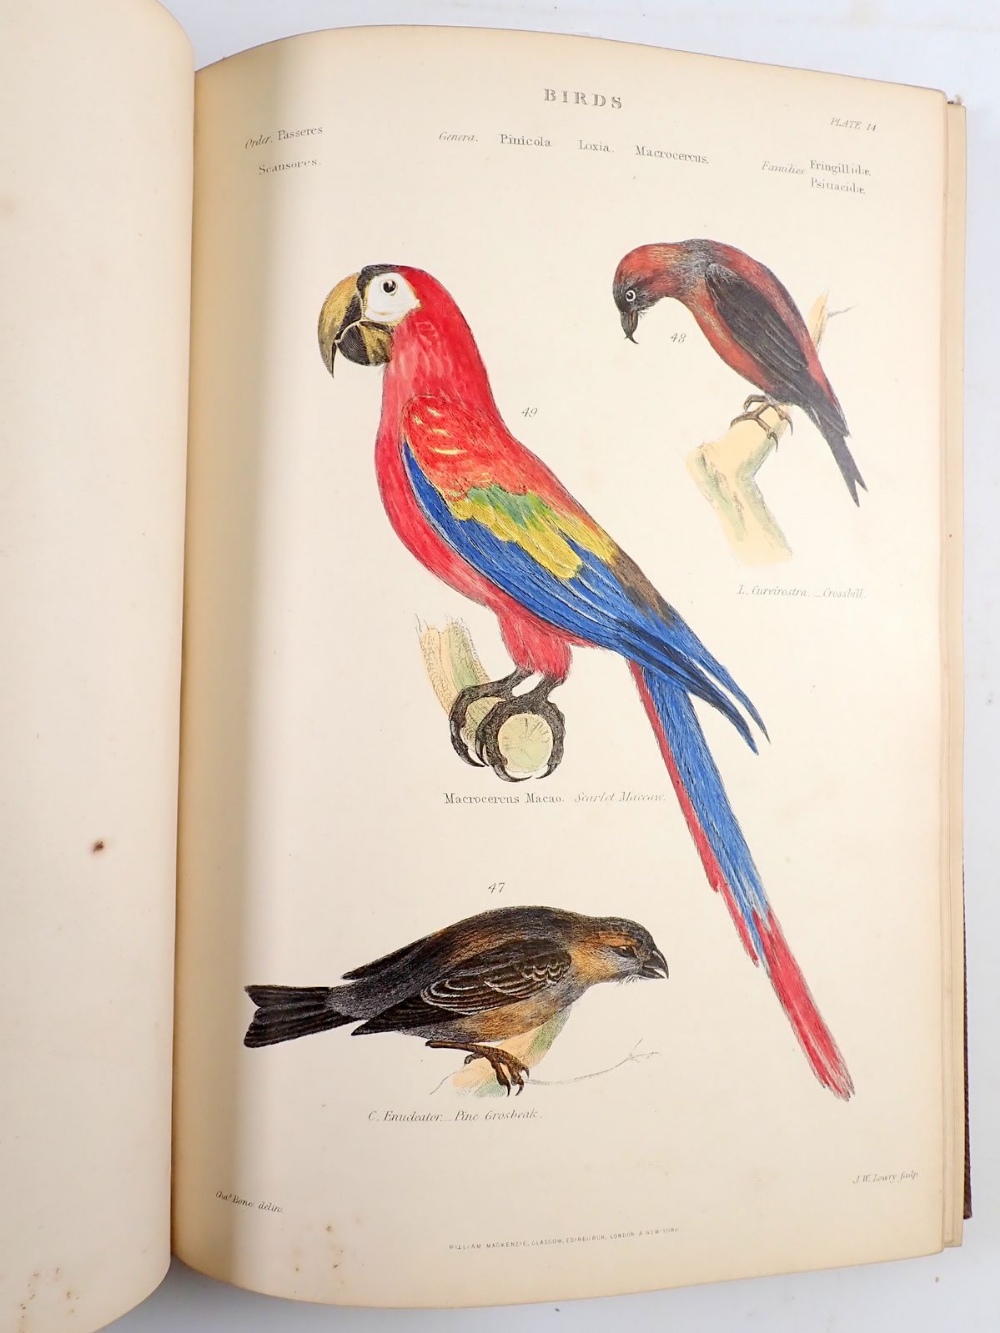 The Museum of Natural History 'Birds' by William S Dallas, multiple hand coloured plates - Image 4 of 4